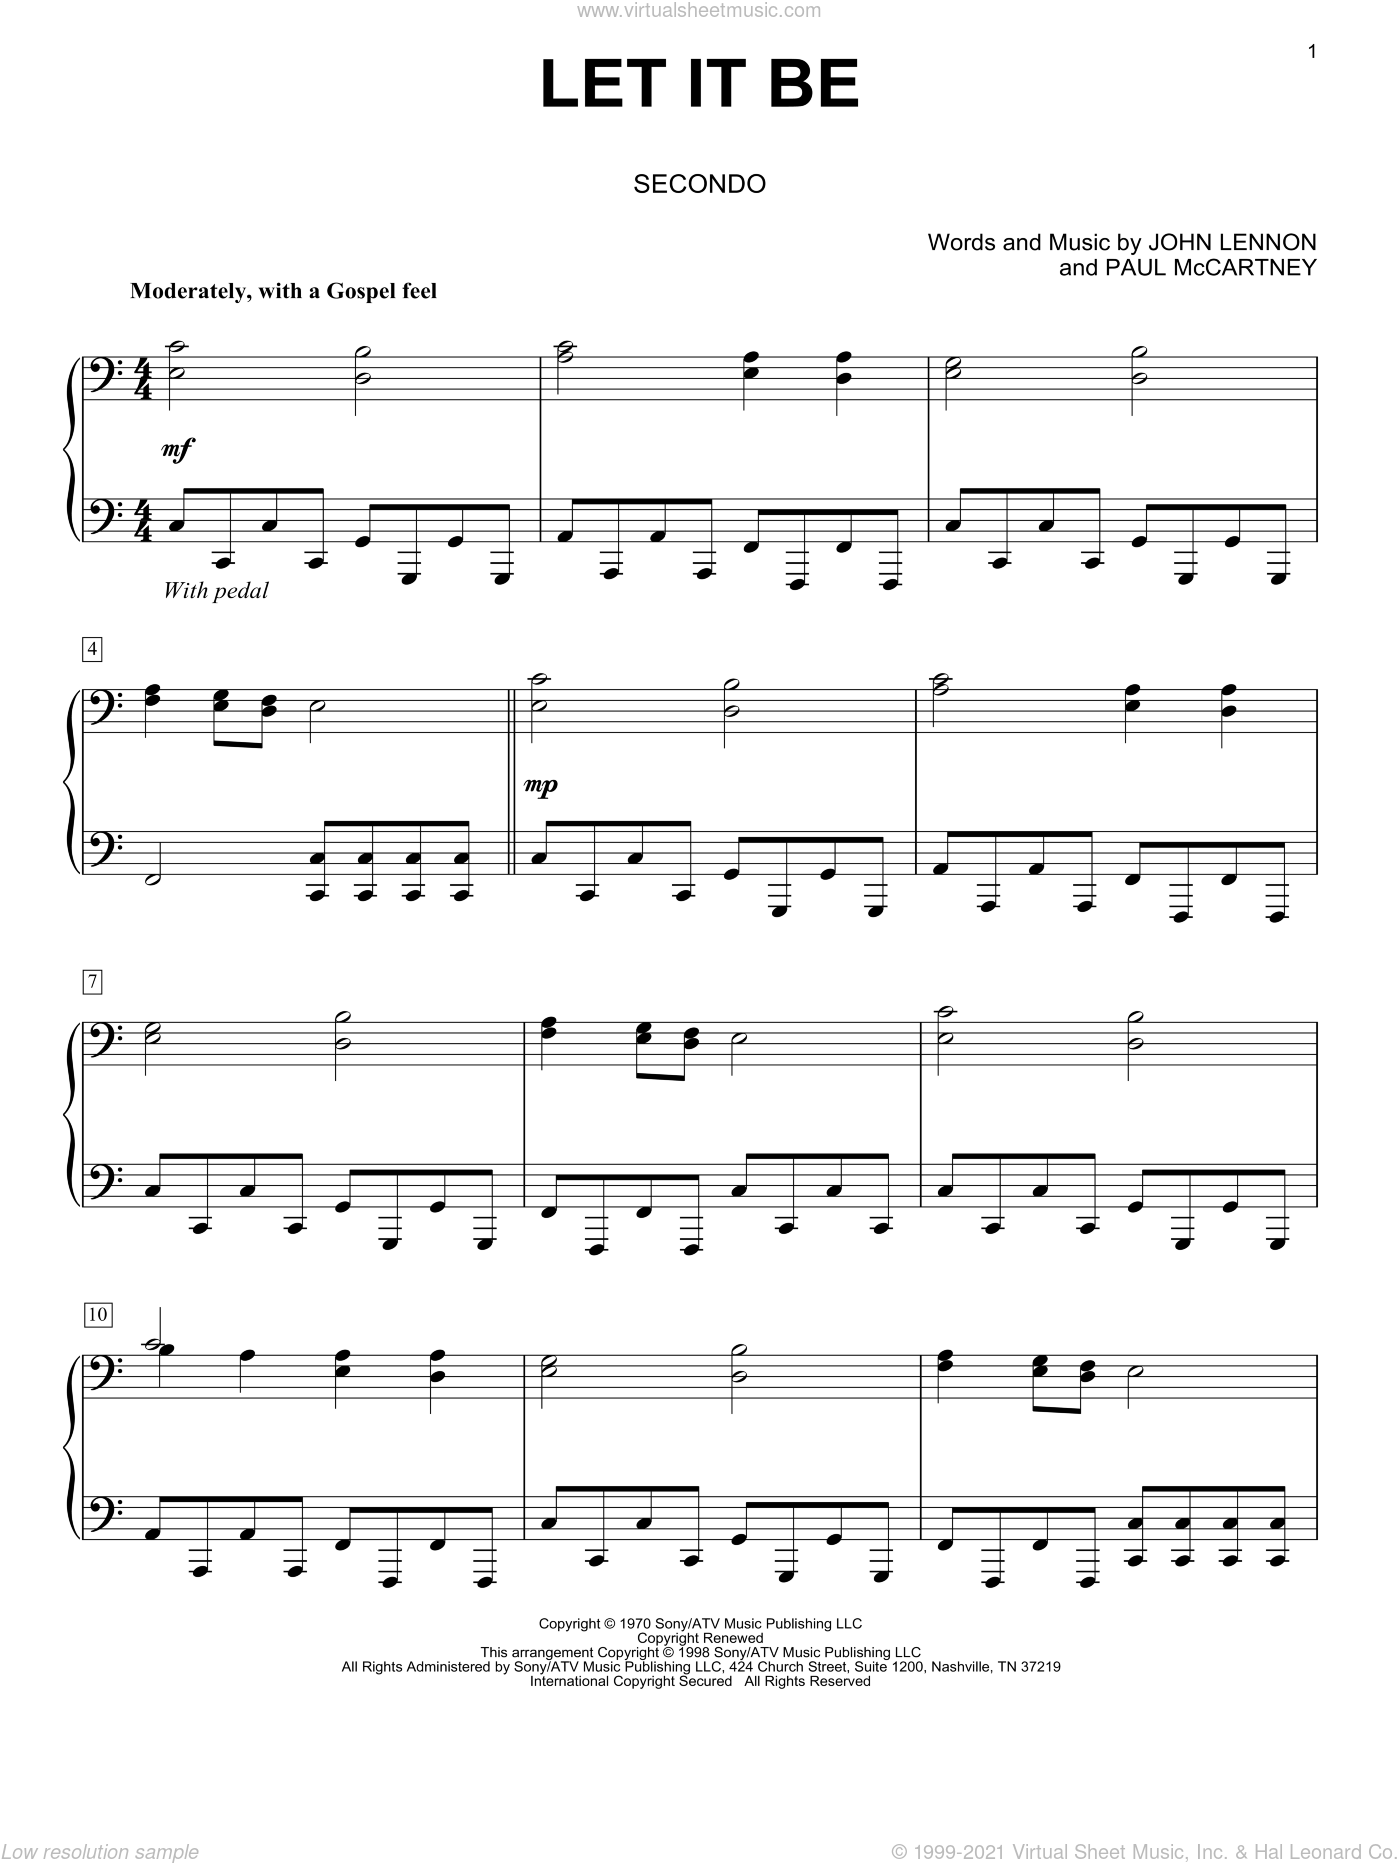 Beatles - Let It Be sheet music for piano four hands [PDF]